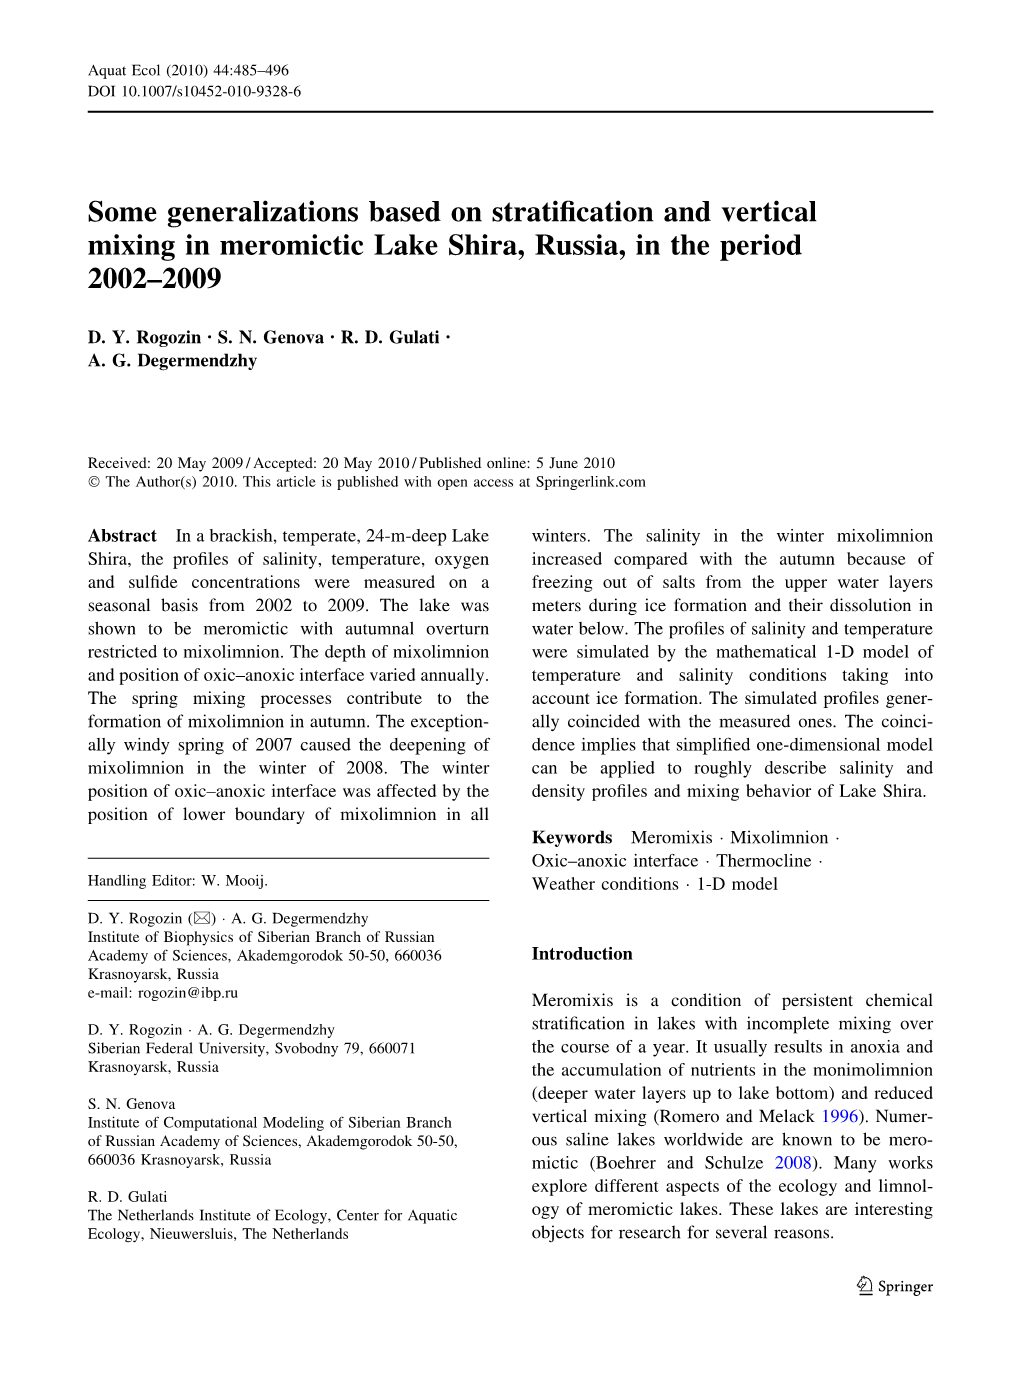 Some Generalizations Based on Stratification and Vertical Mixing In